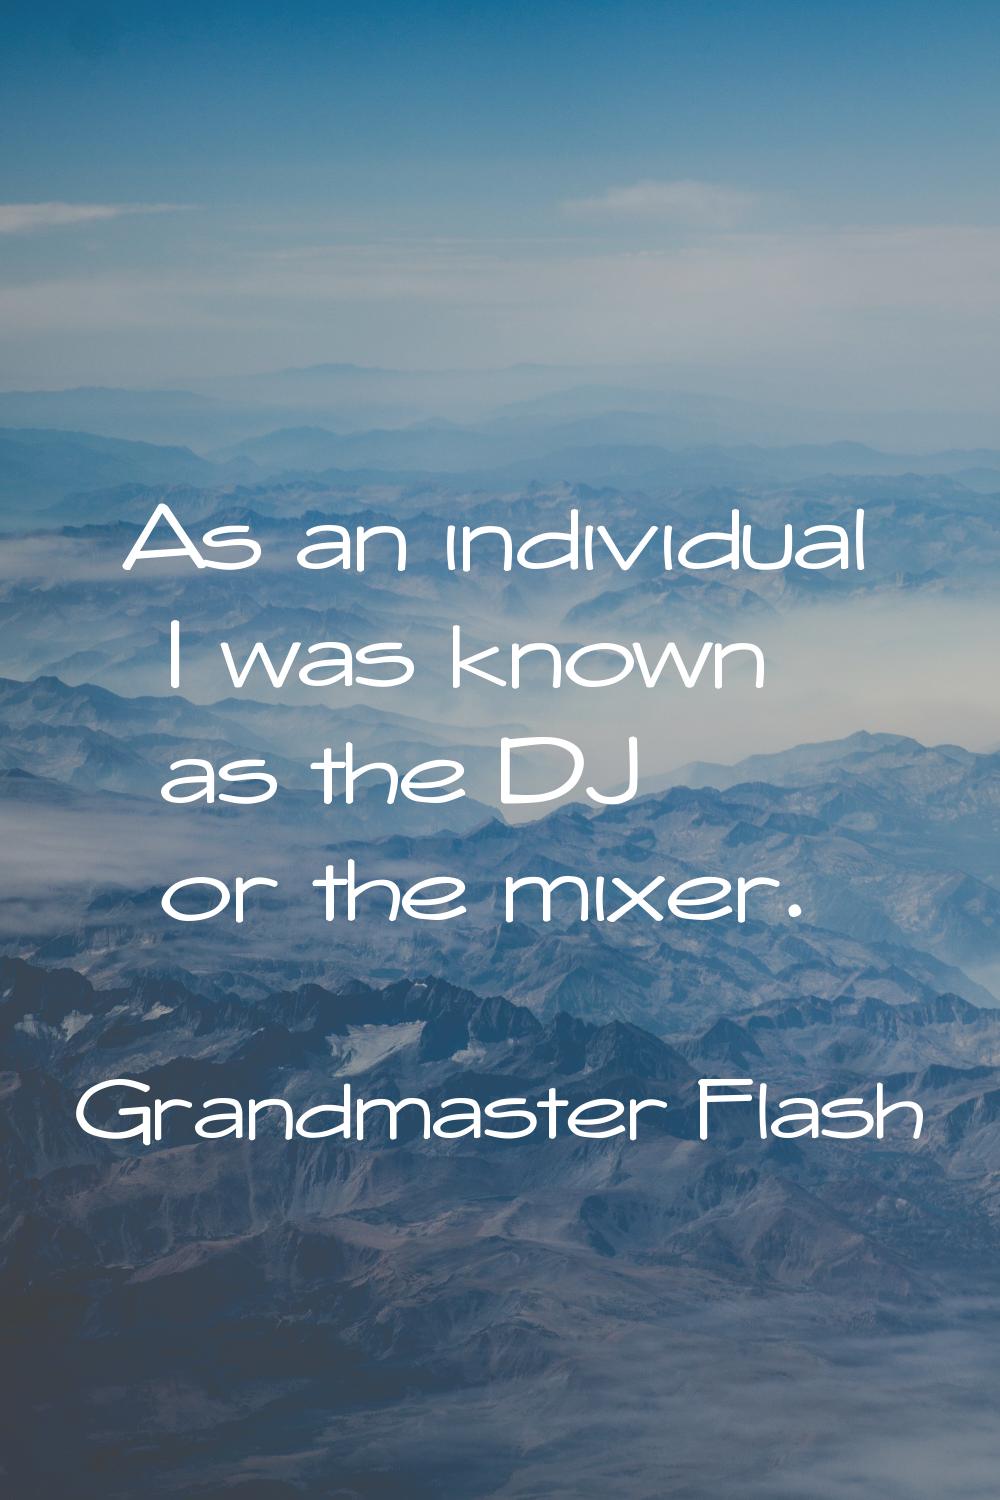 As an individual I was known as the DJ or the mixer.